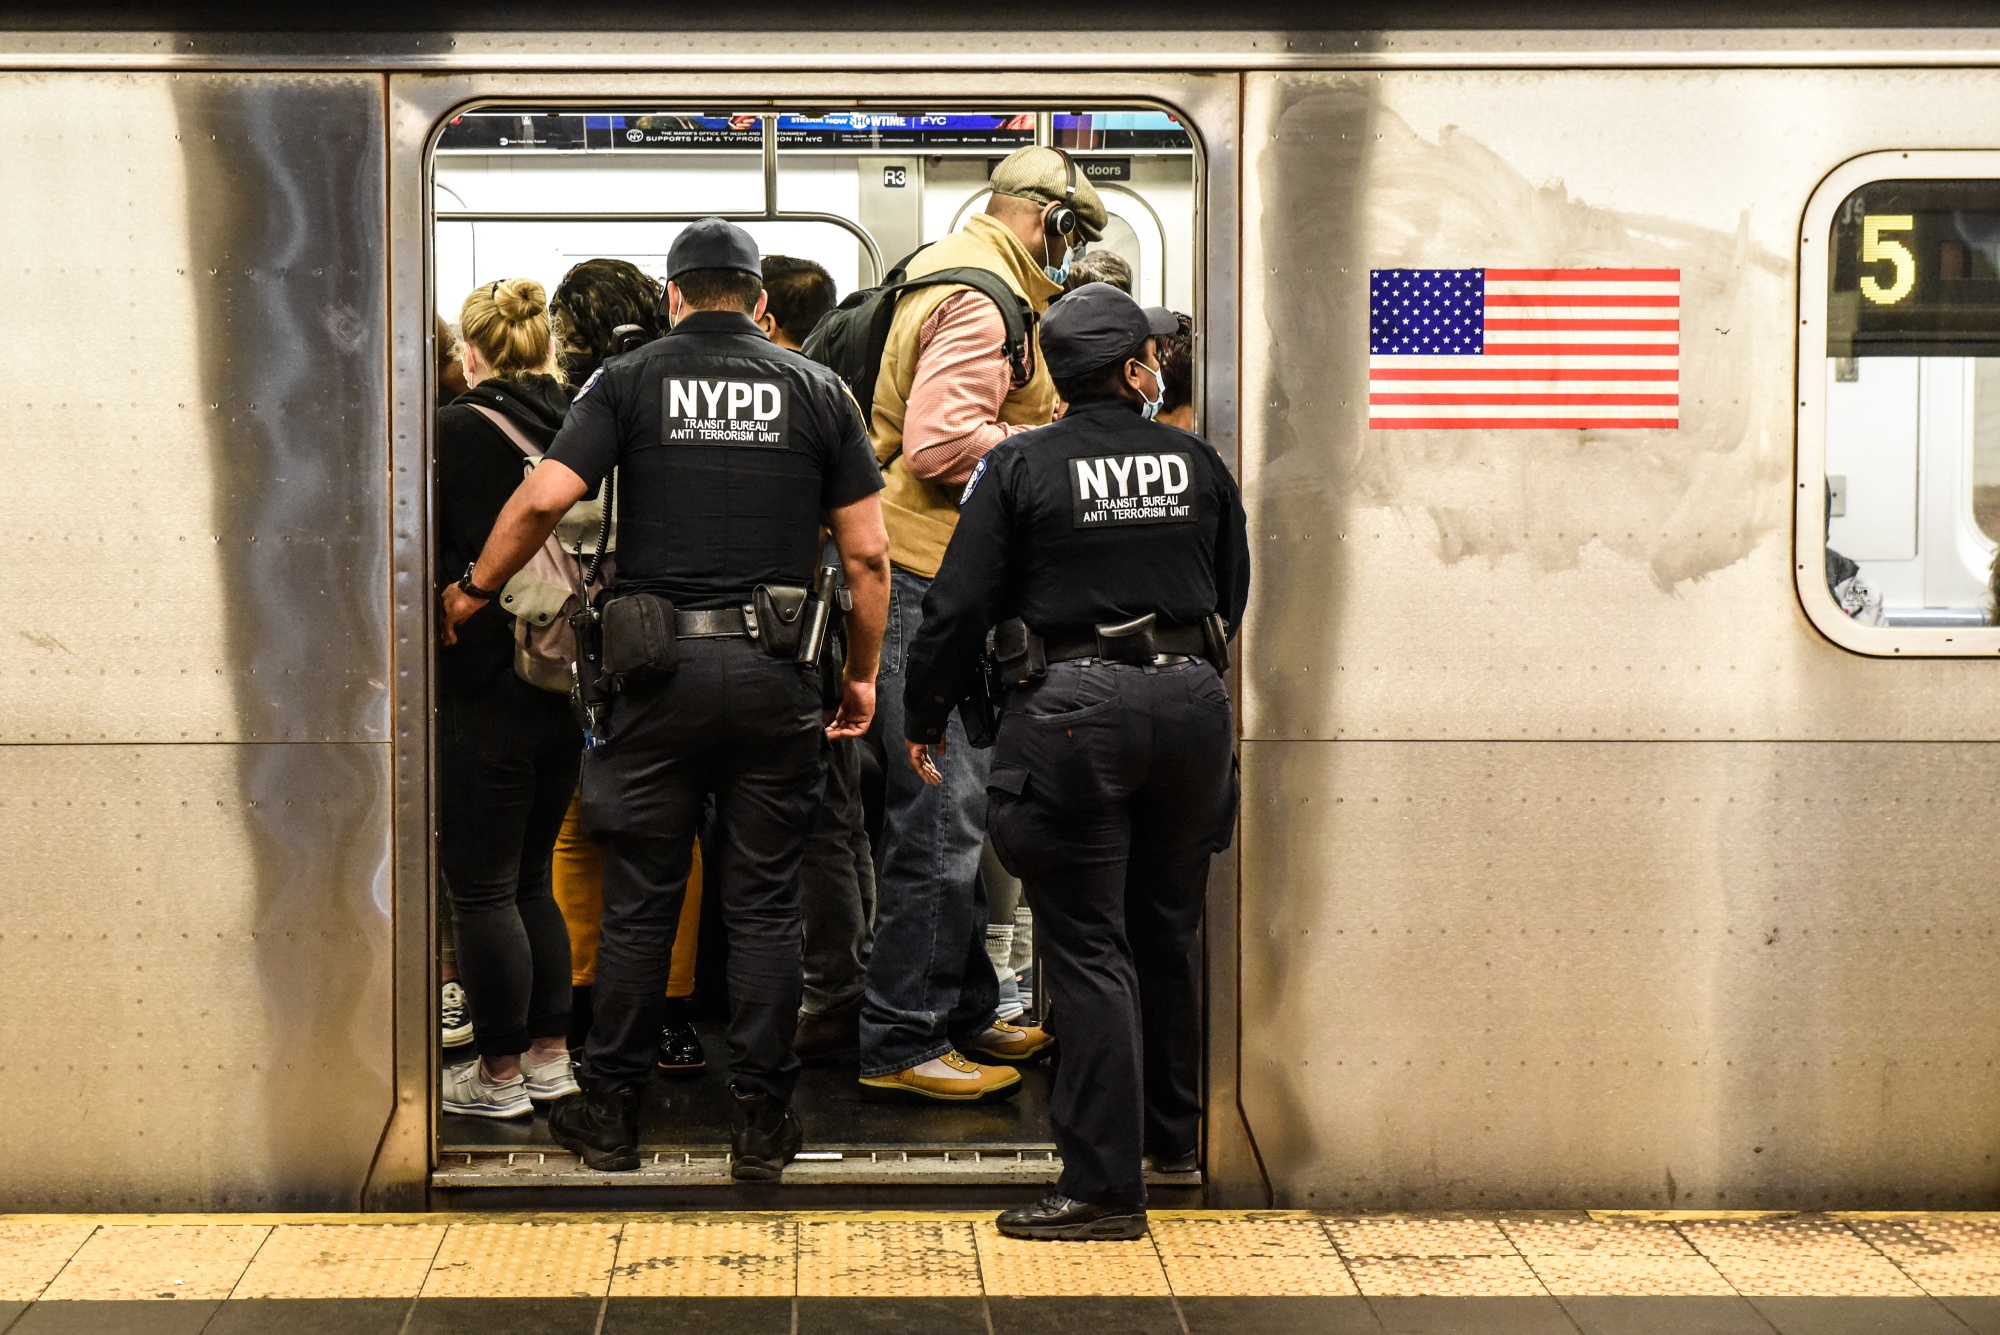 New York Police Department&nbsp;officers enter a subway&nbsp;in New York City.&nbsp;